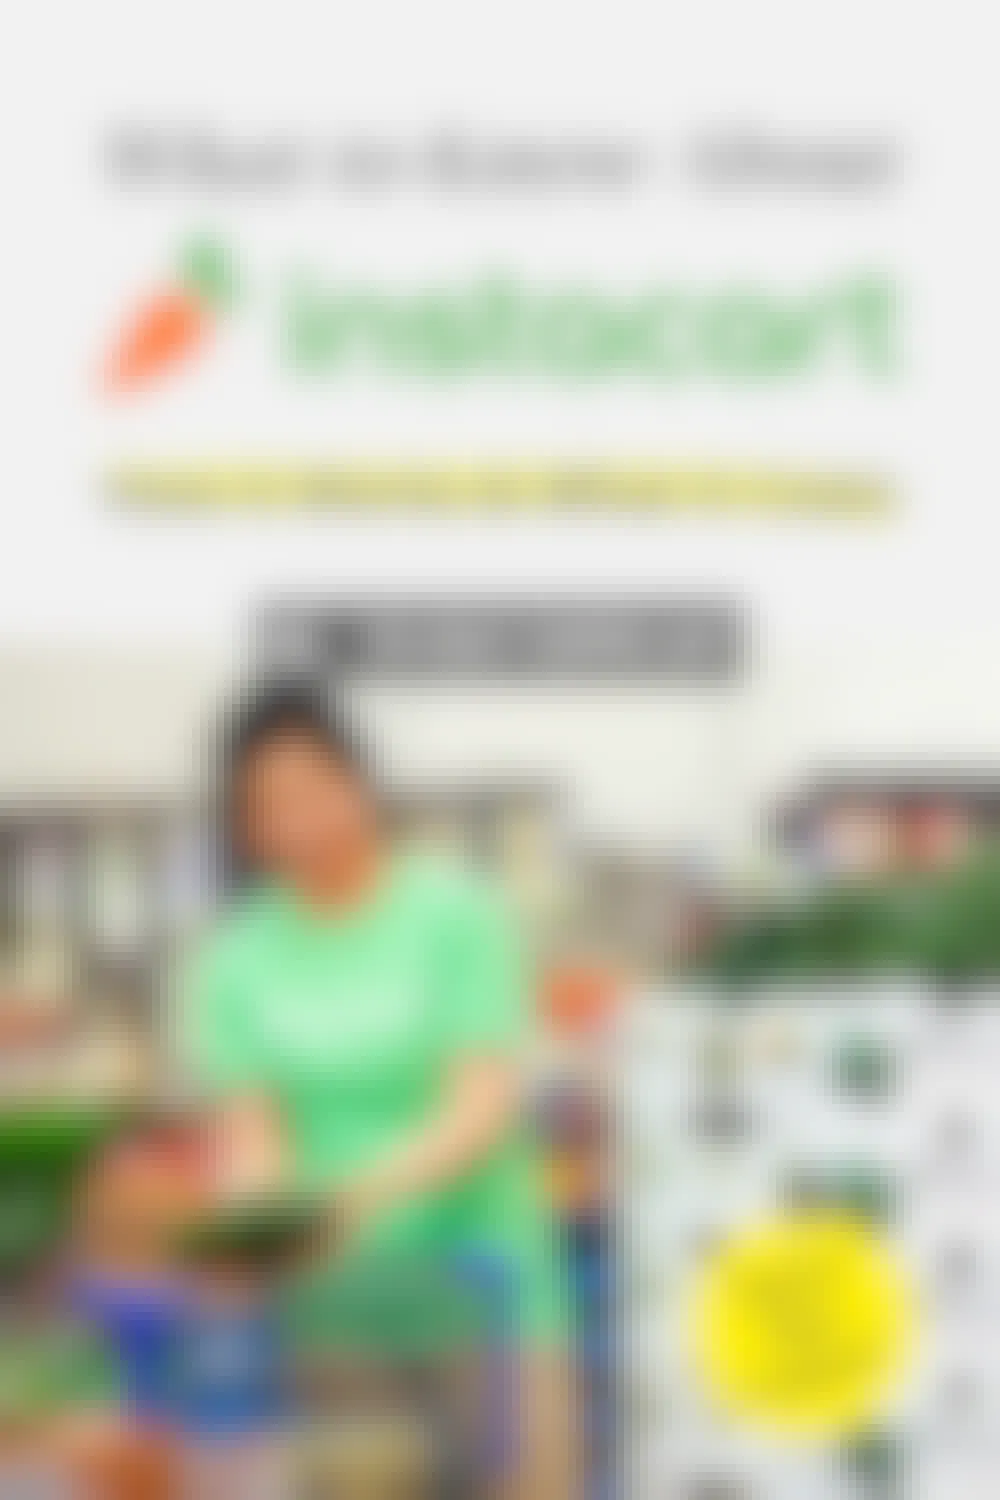 How Does Instacart Work? And How Much Do the Fees Really Cost?